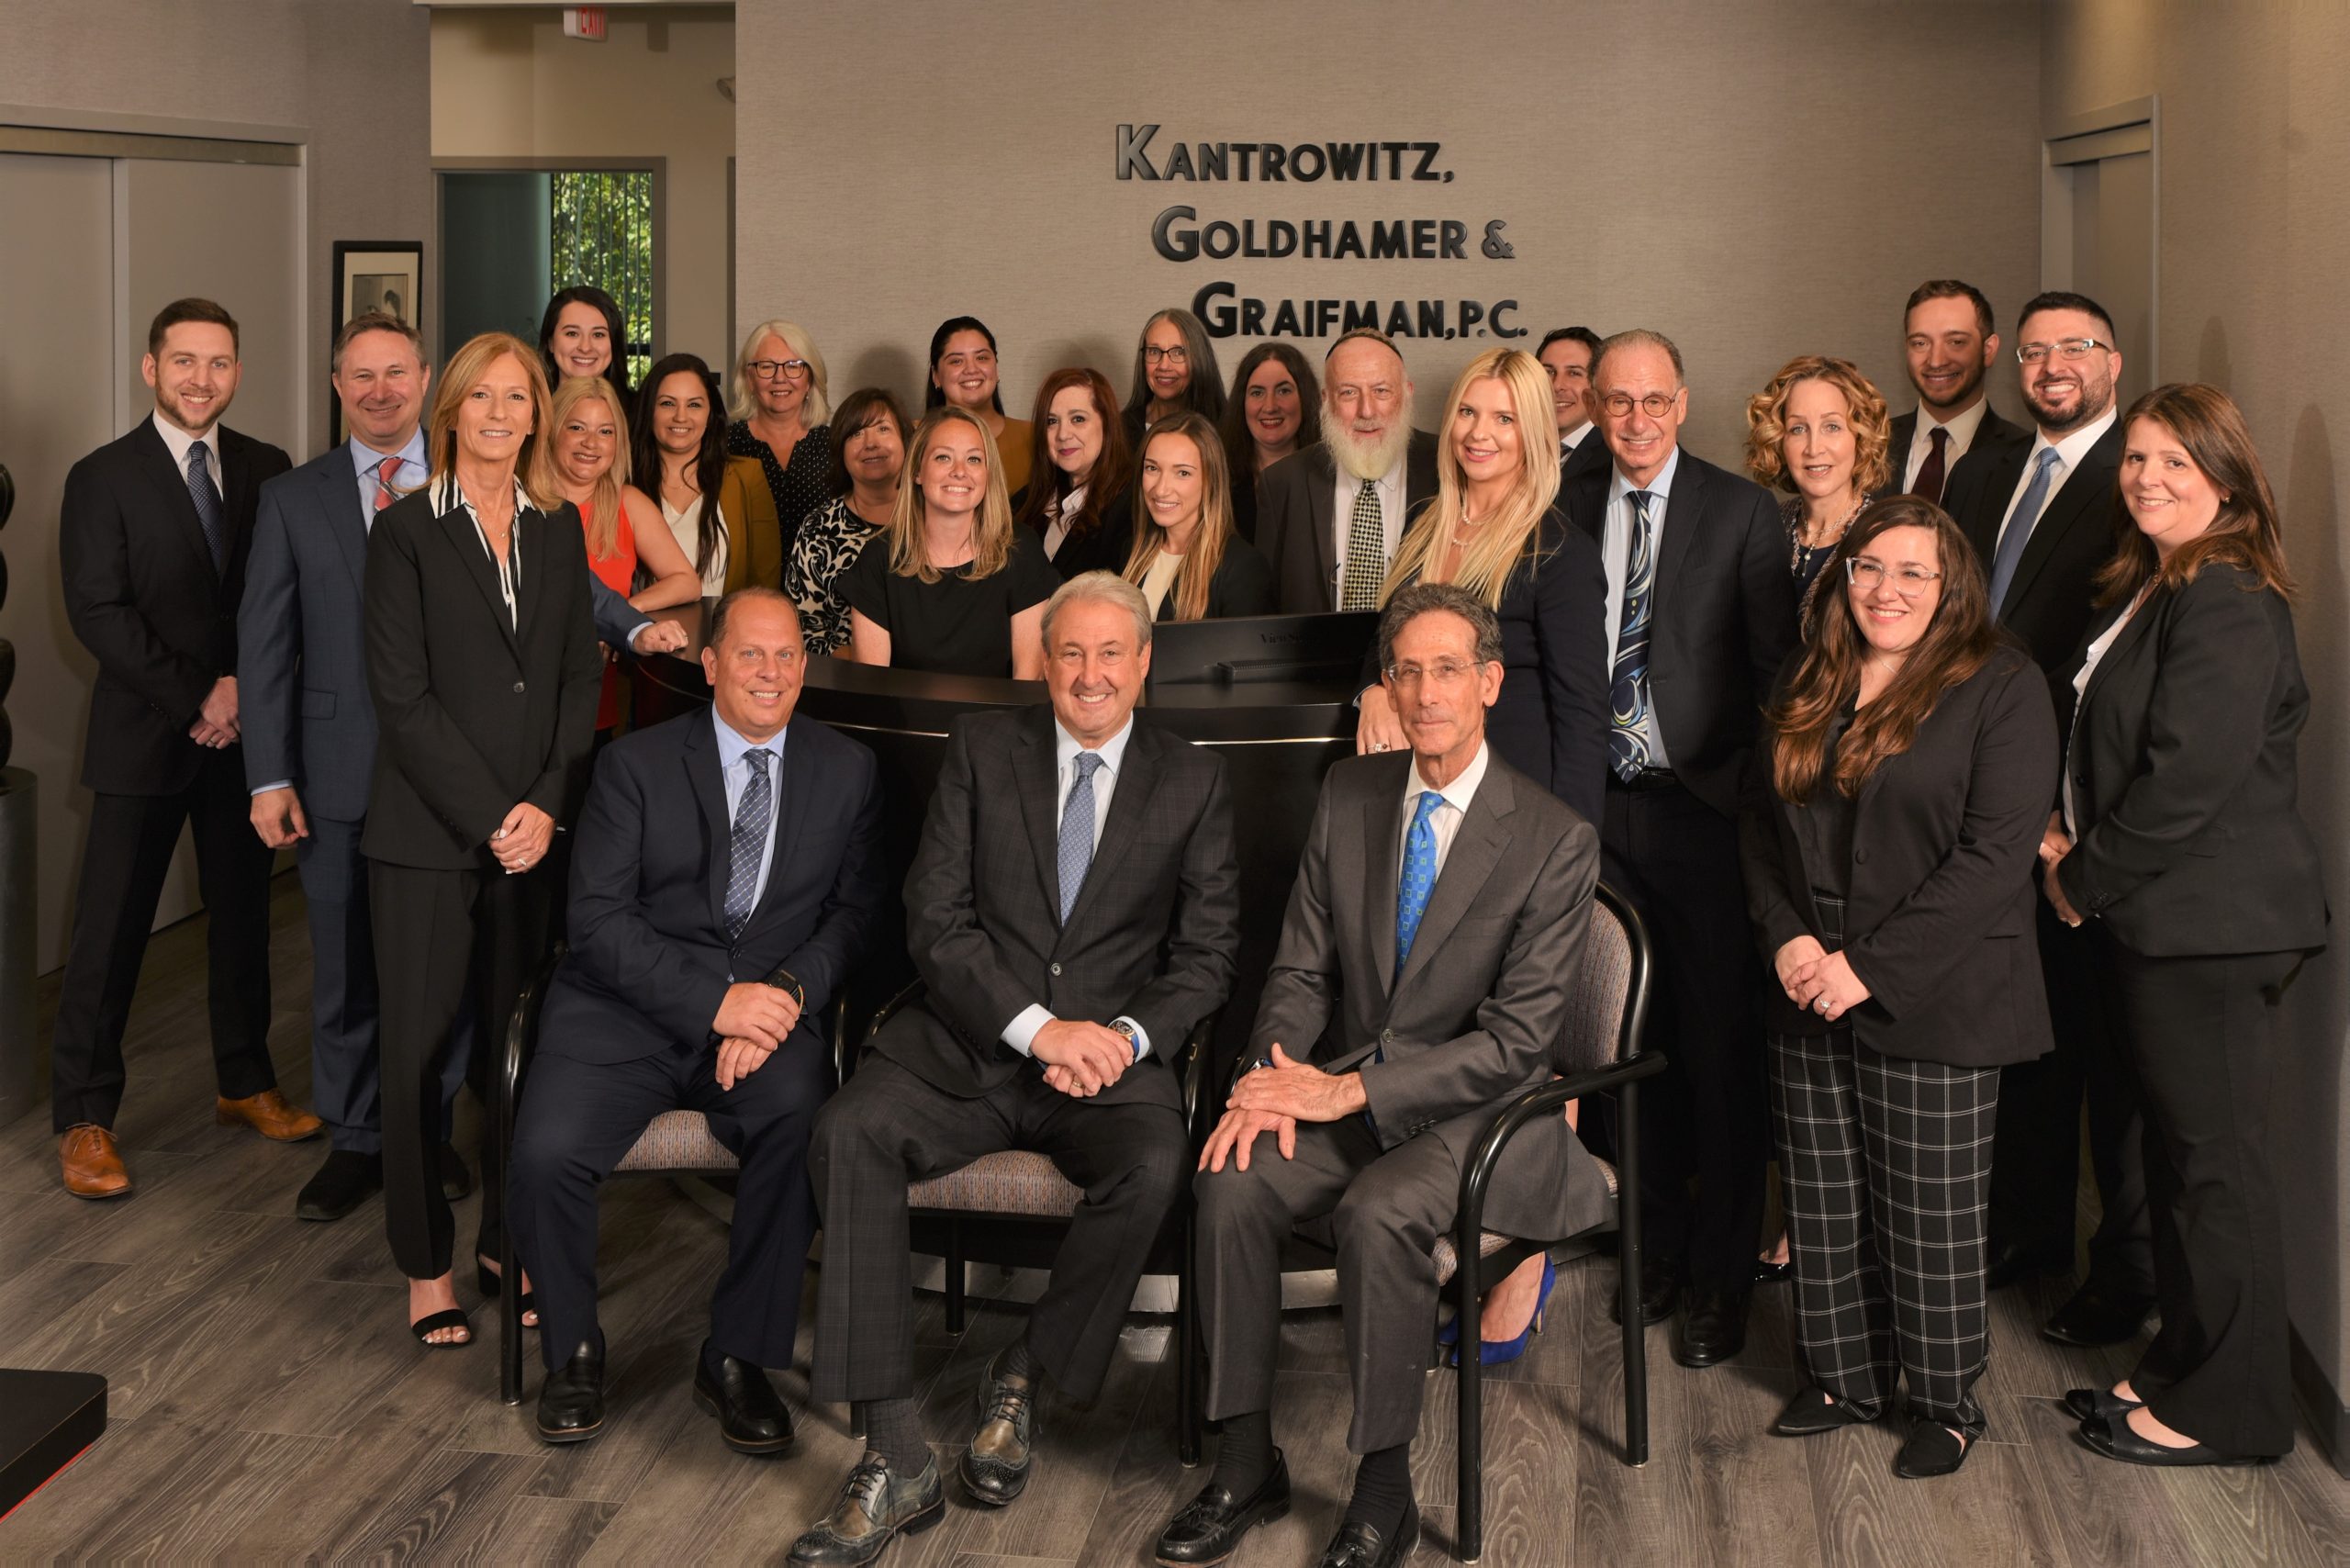 A group shot of all the employees of Kantrowitz, Goldhamer & Graifman, P.C.